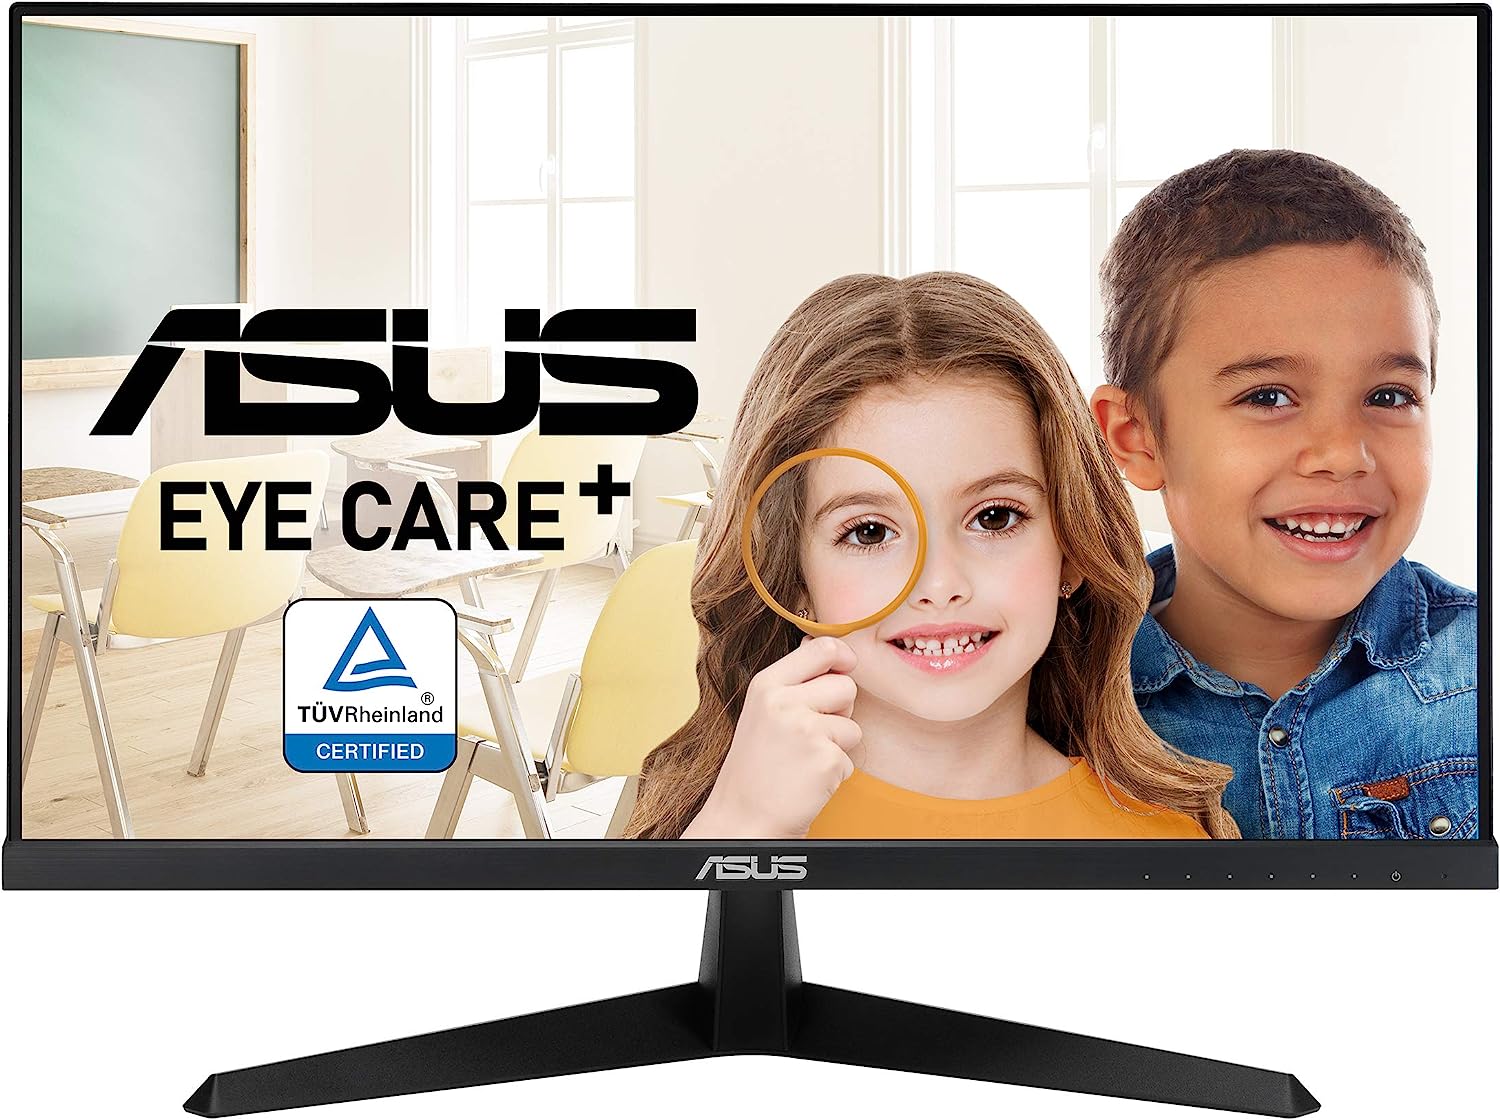 ASUS VY249HE 23.8” Eye Care Monitor, 1080P Full HD, [...]